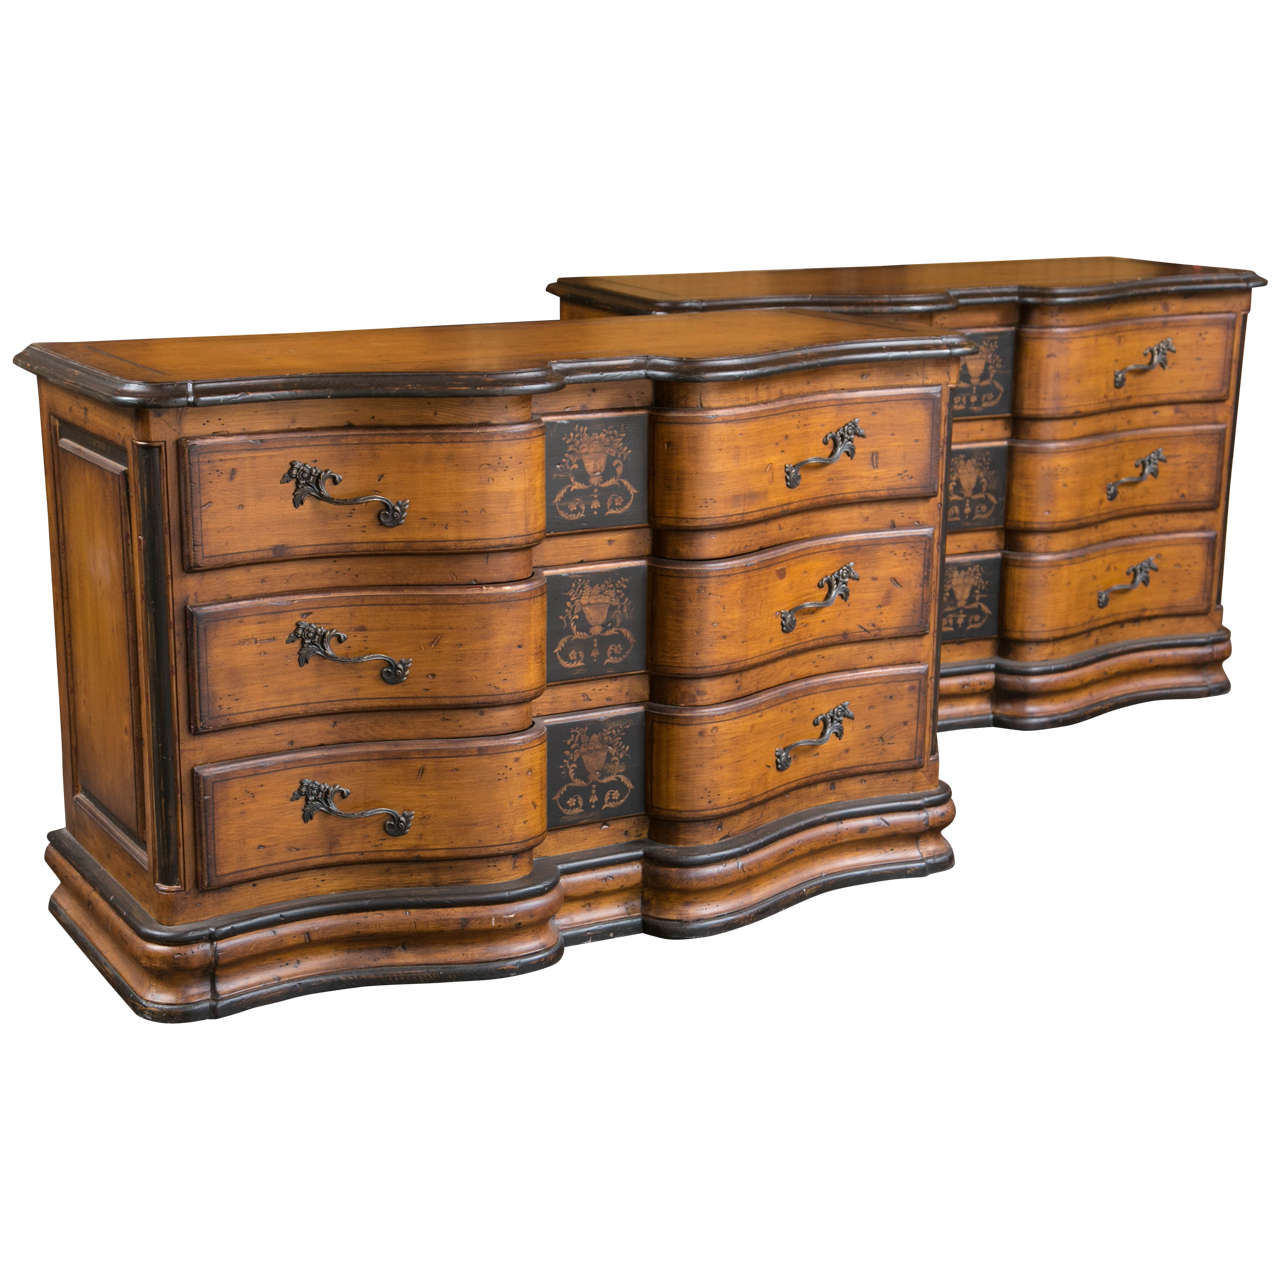 Pair of Italian Baroque Style Serpentine Front Commodes